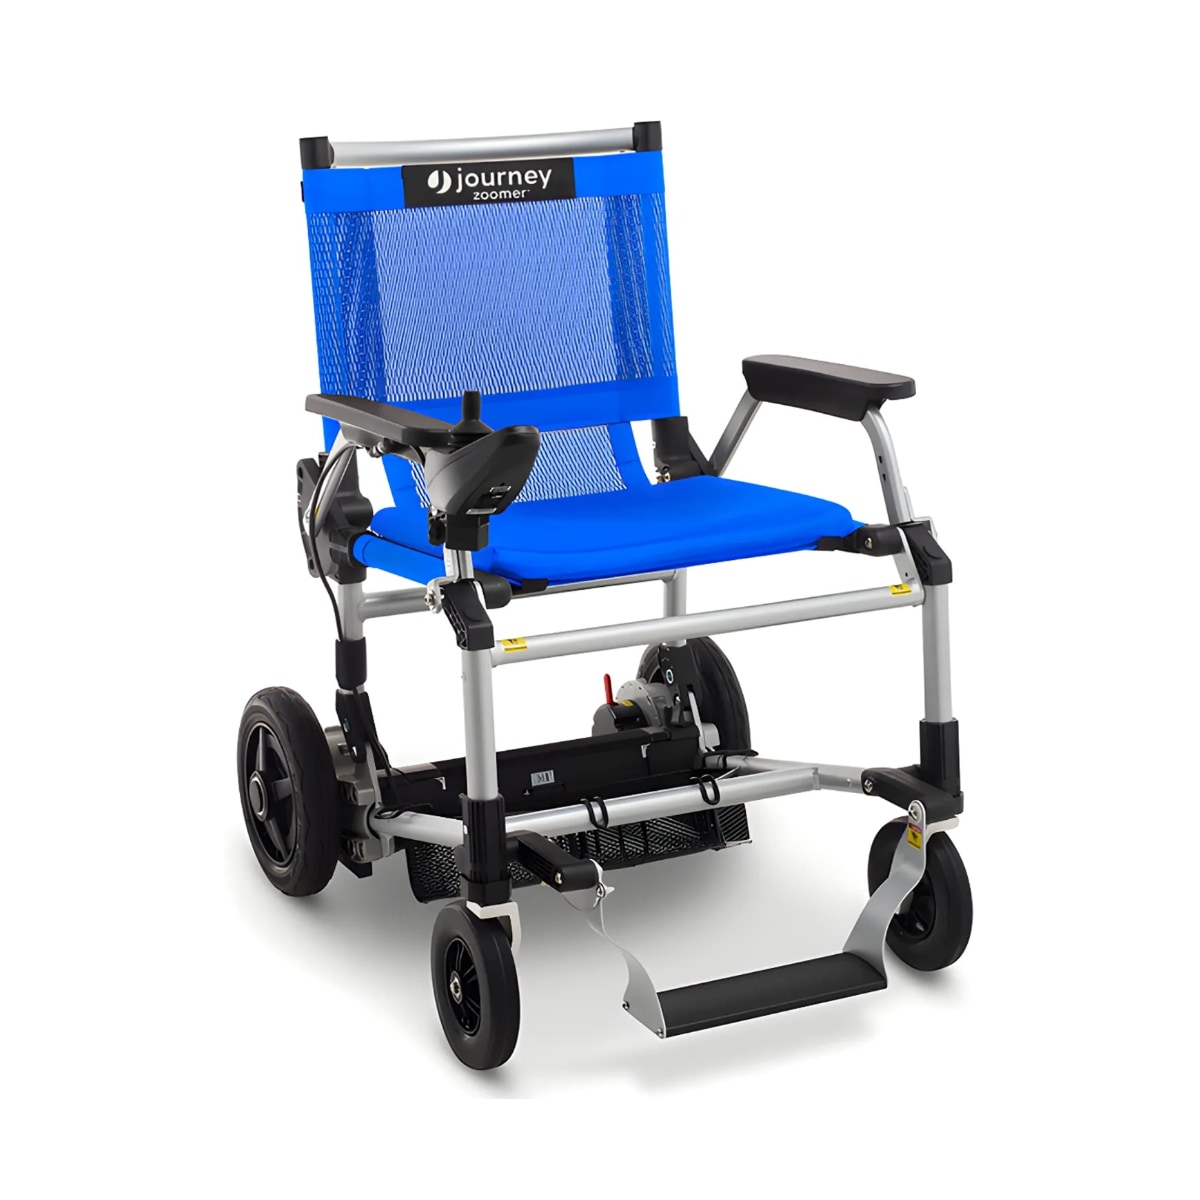 Zoomer power wheelchair with blue fabric and sporty design